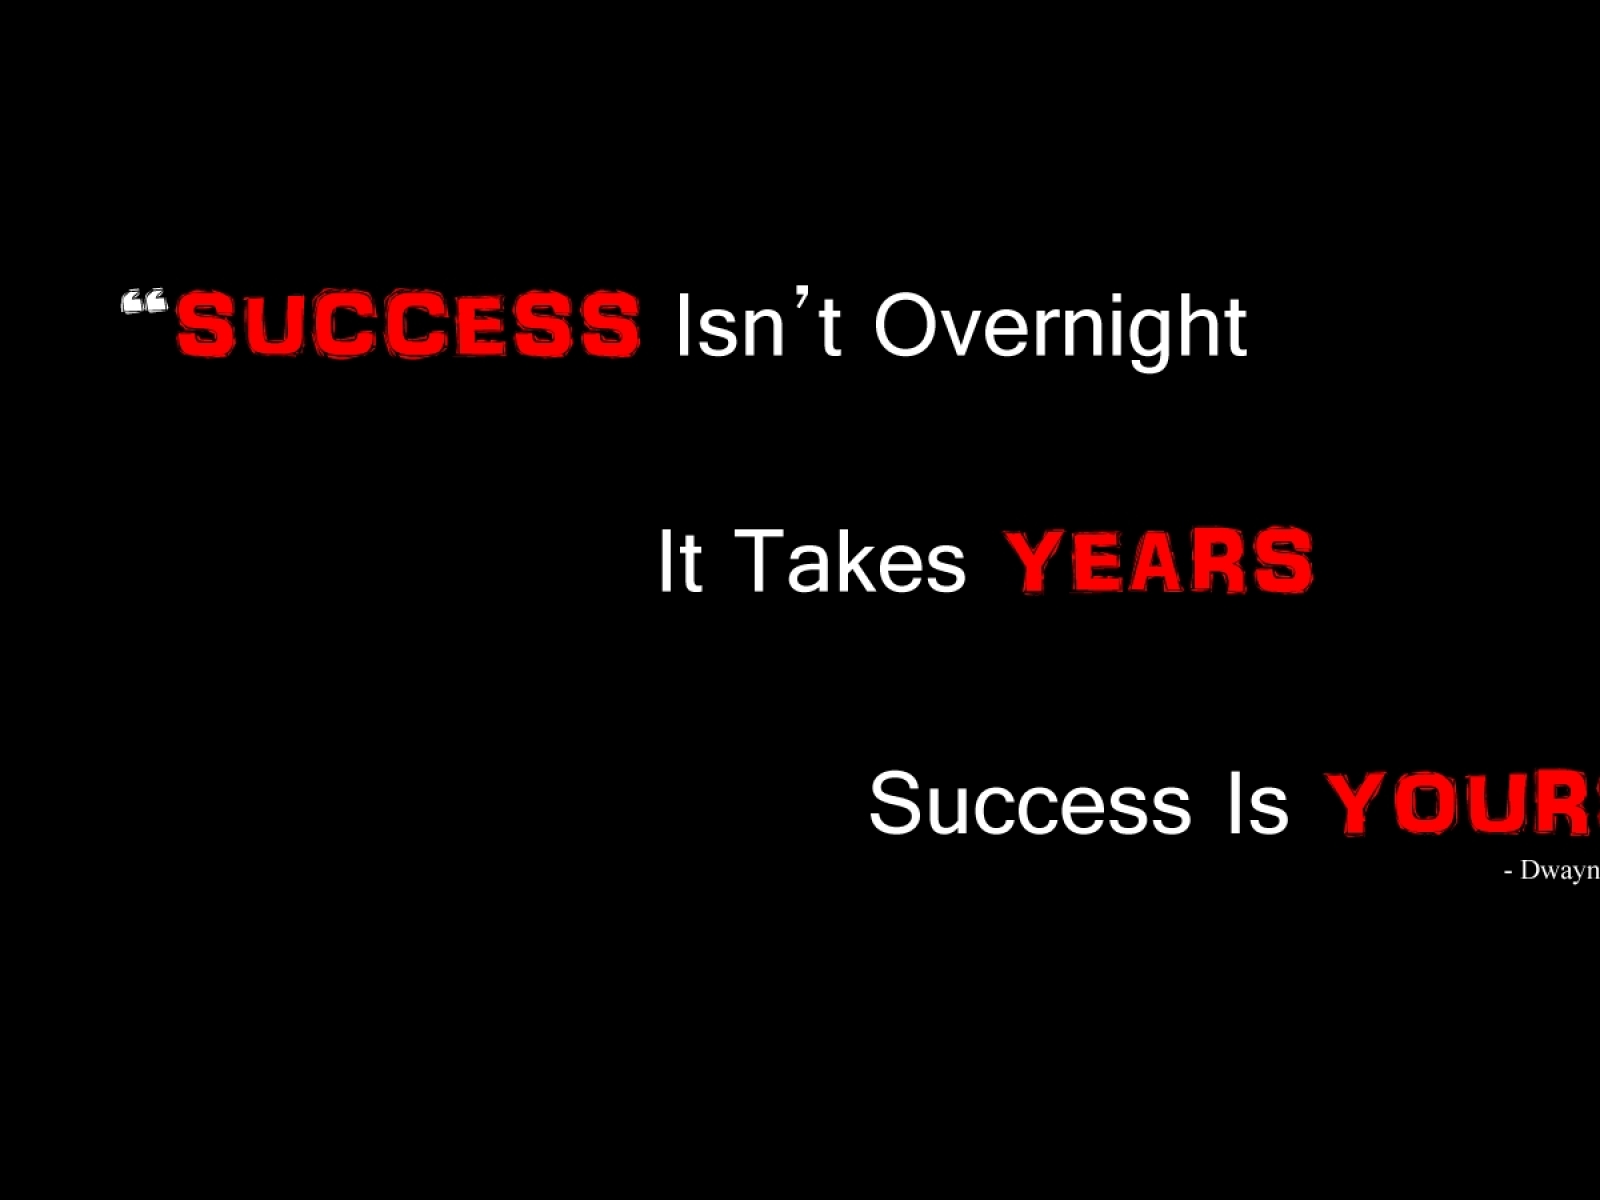 Future Business of 21st Century: SUCCESS HD QUOTES